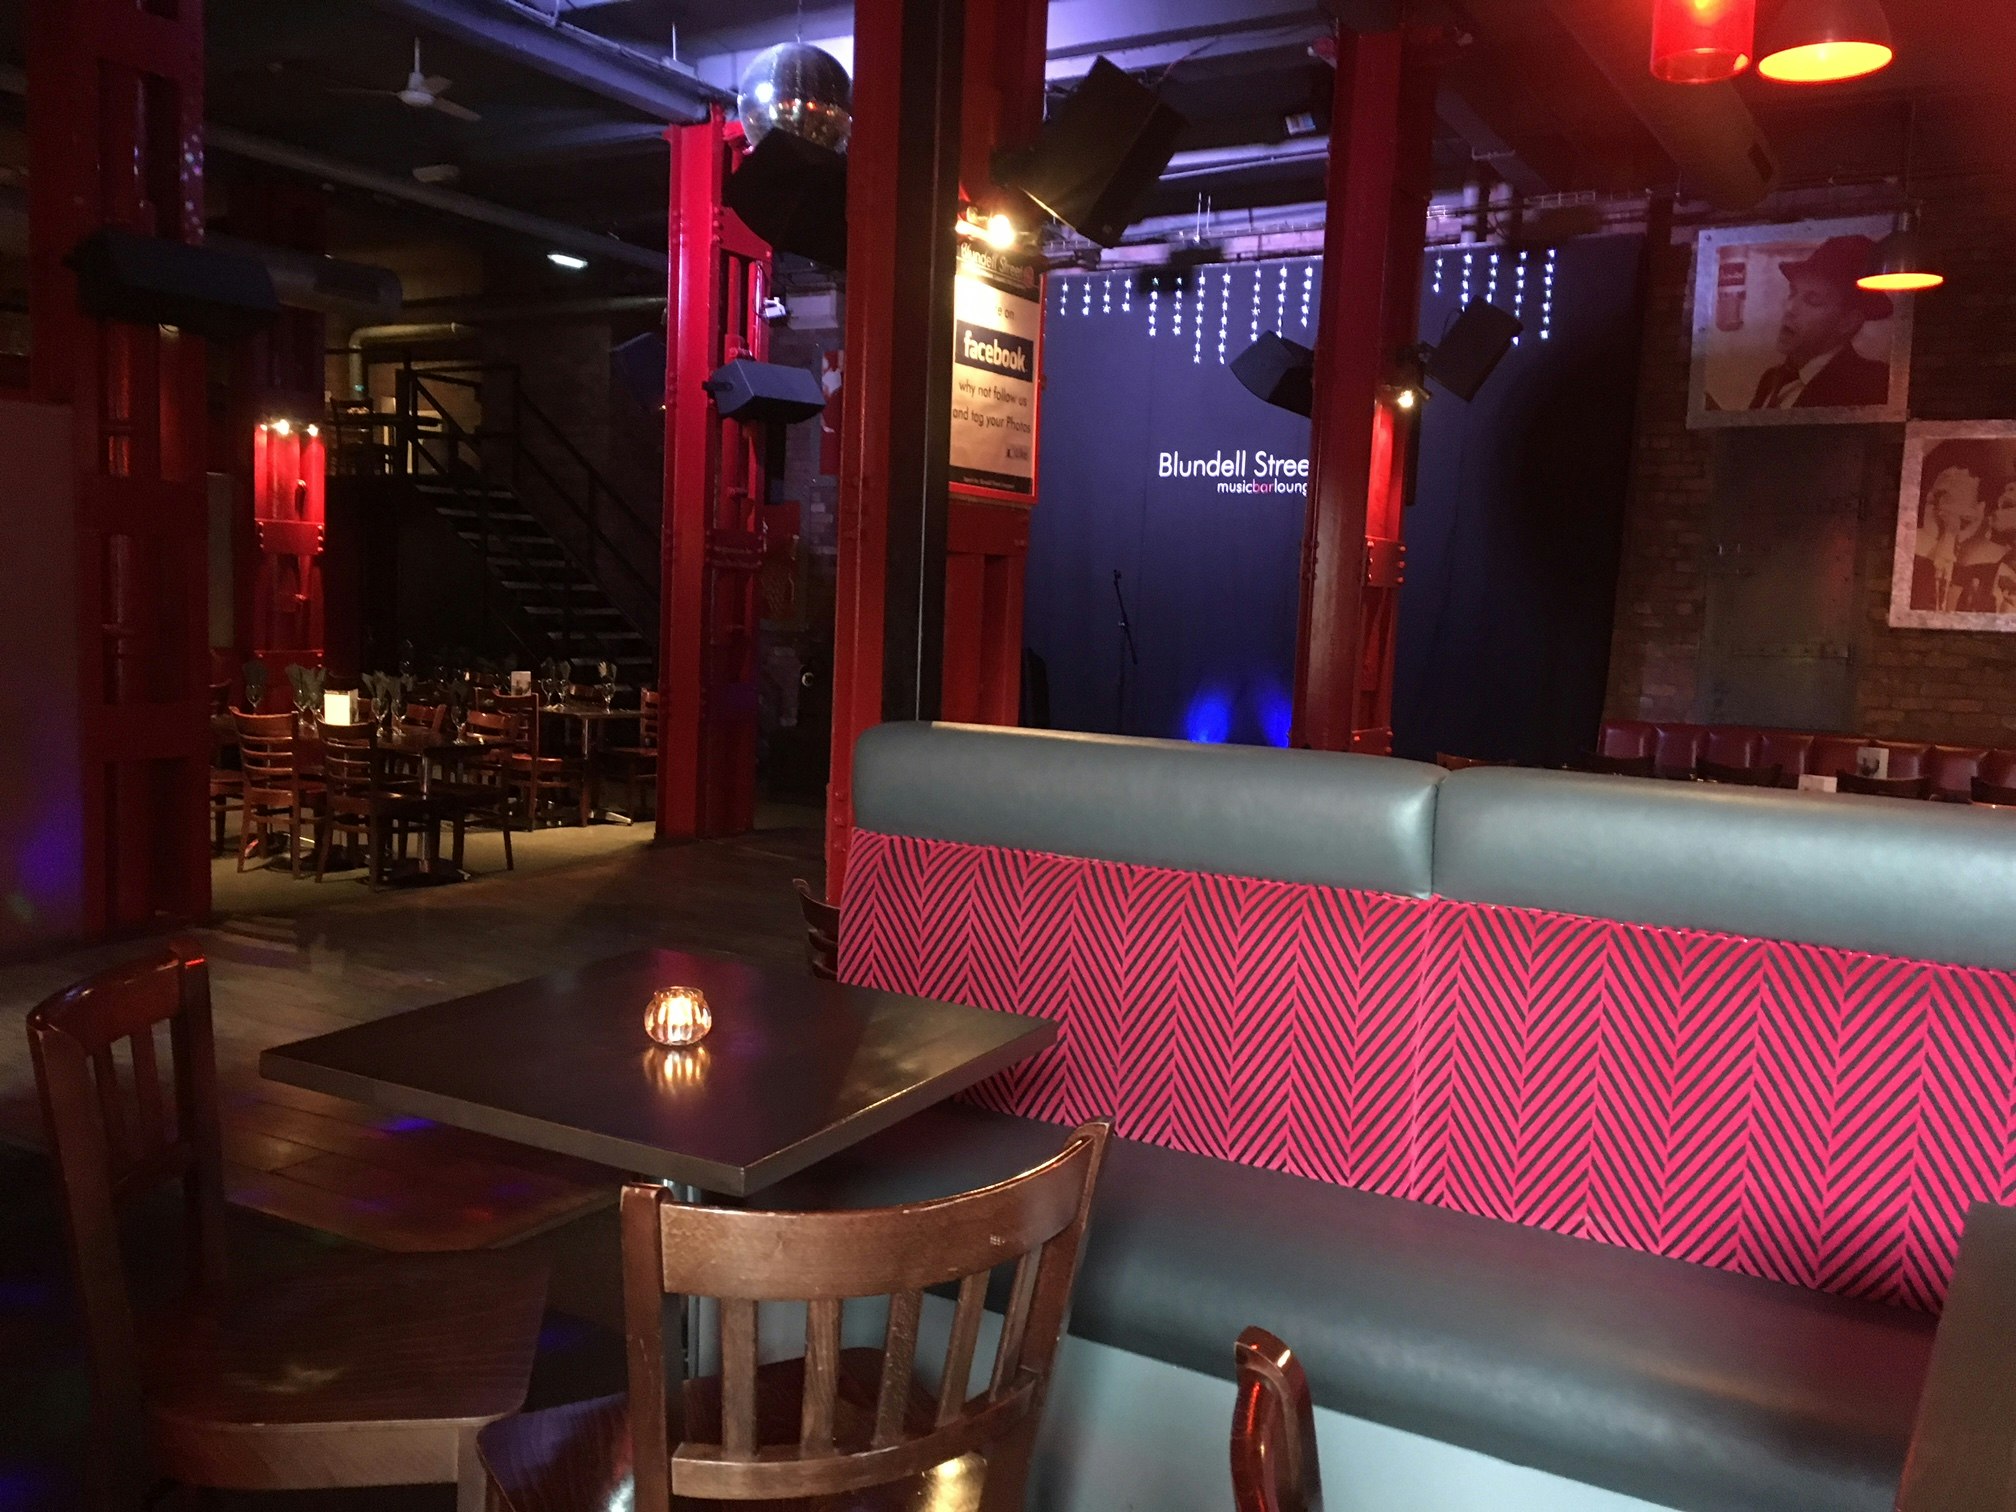 Office Party Venues in Liverpool - Blundell Street Restaurant and Bar